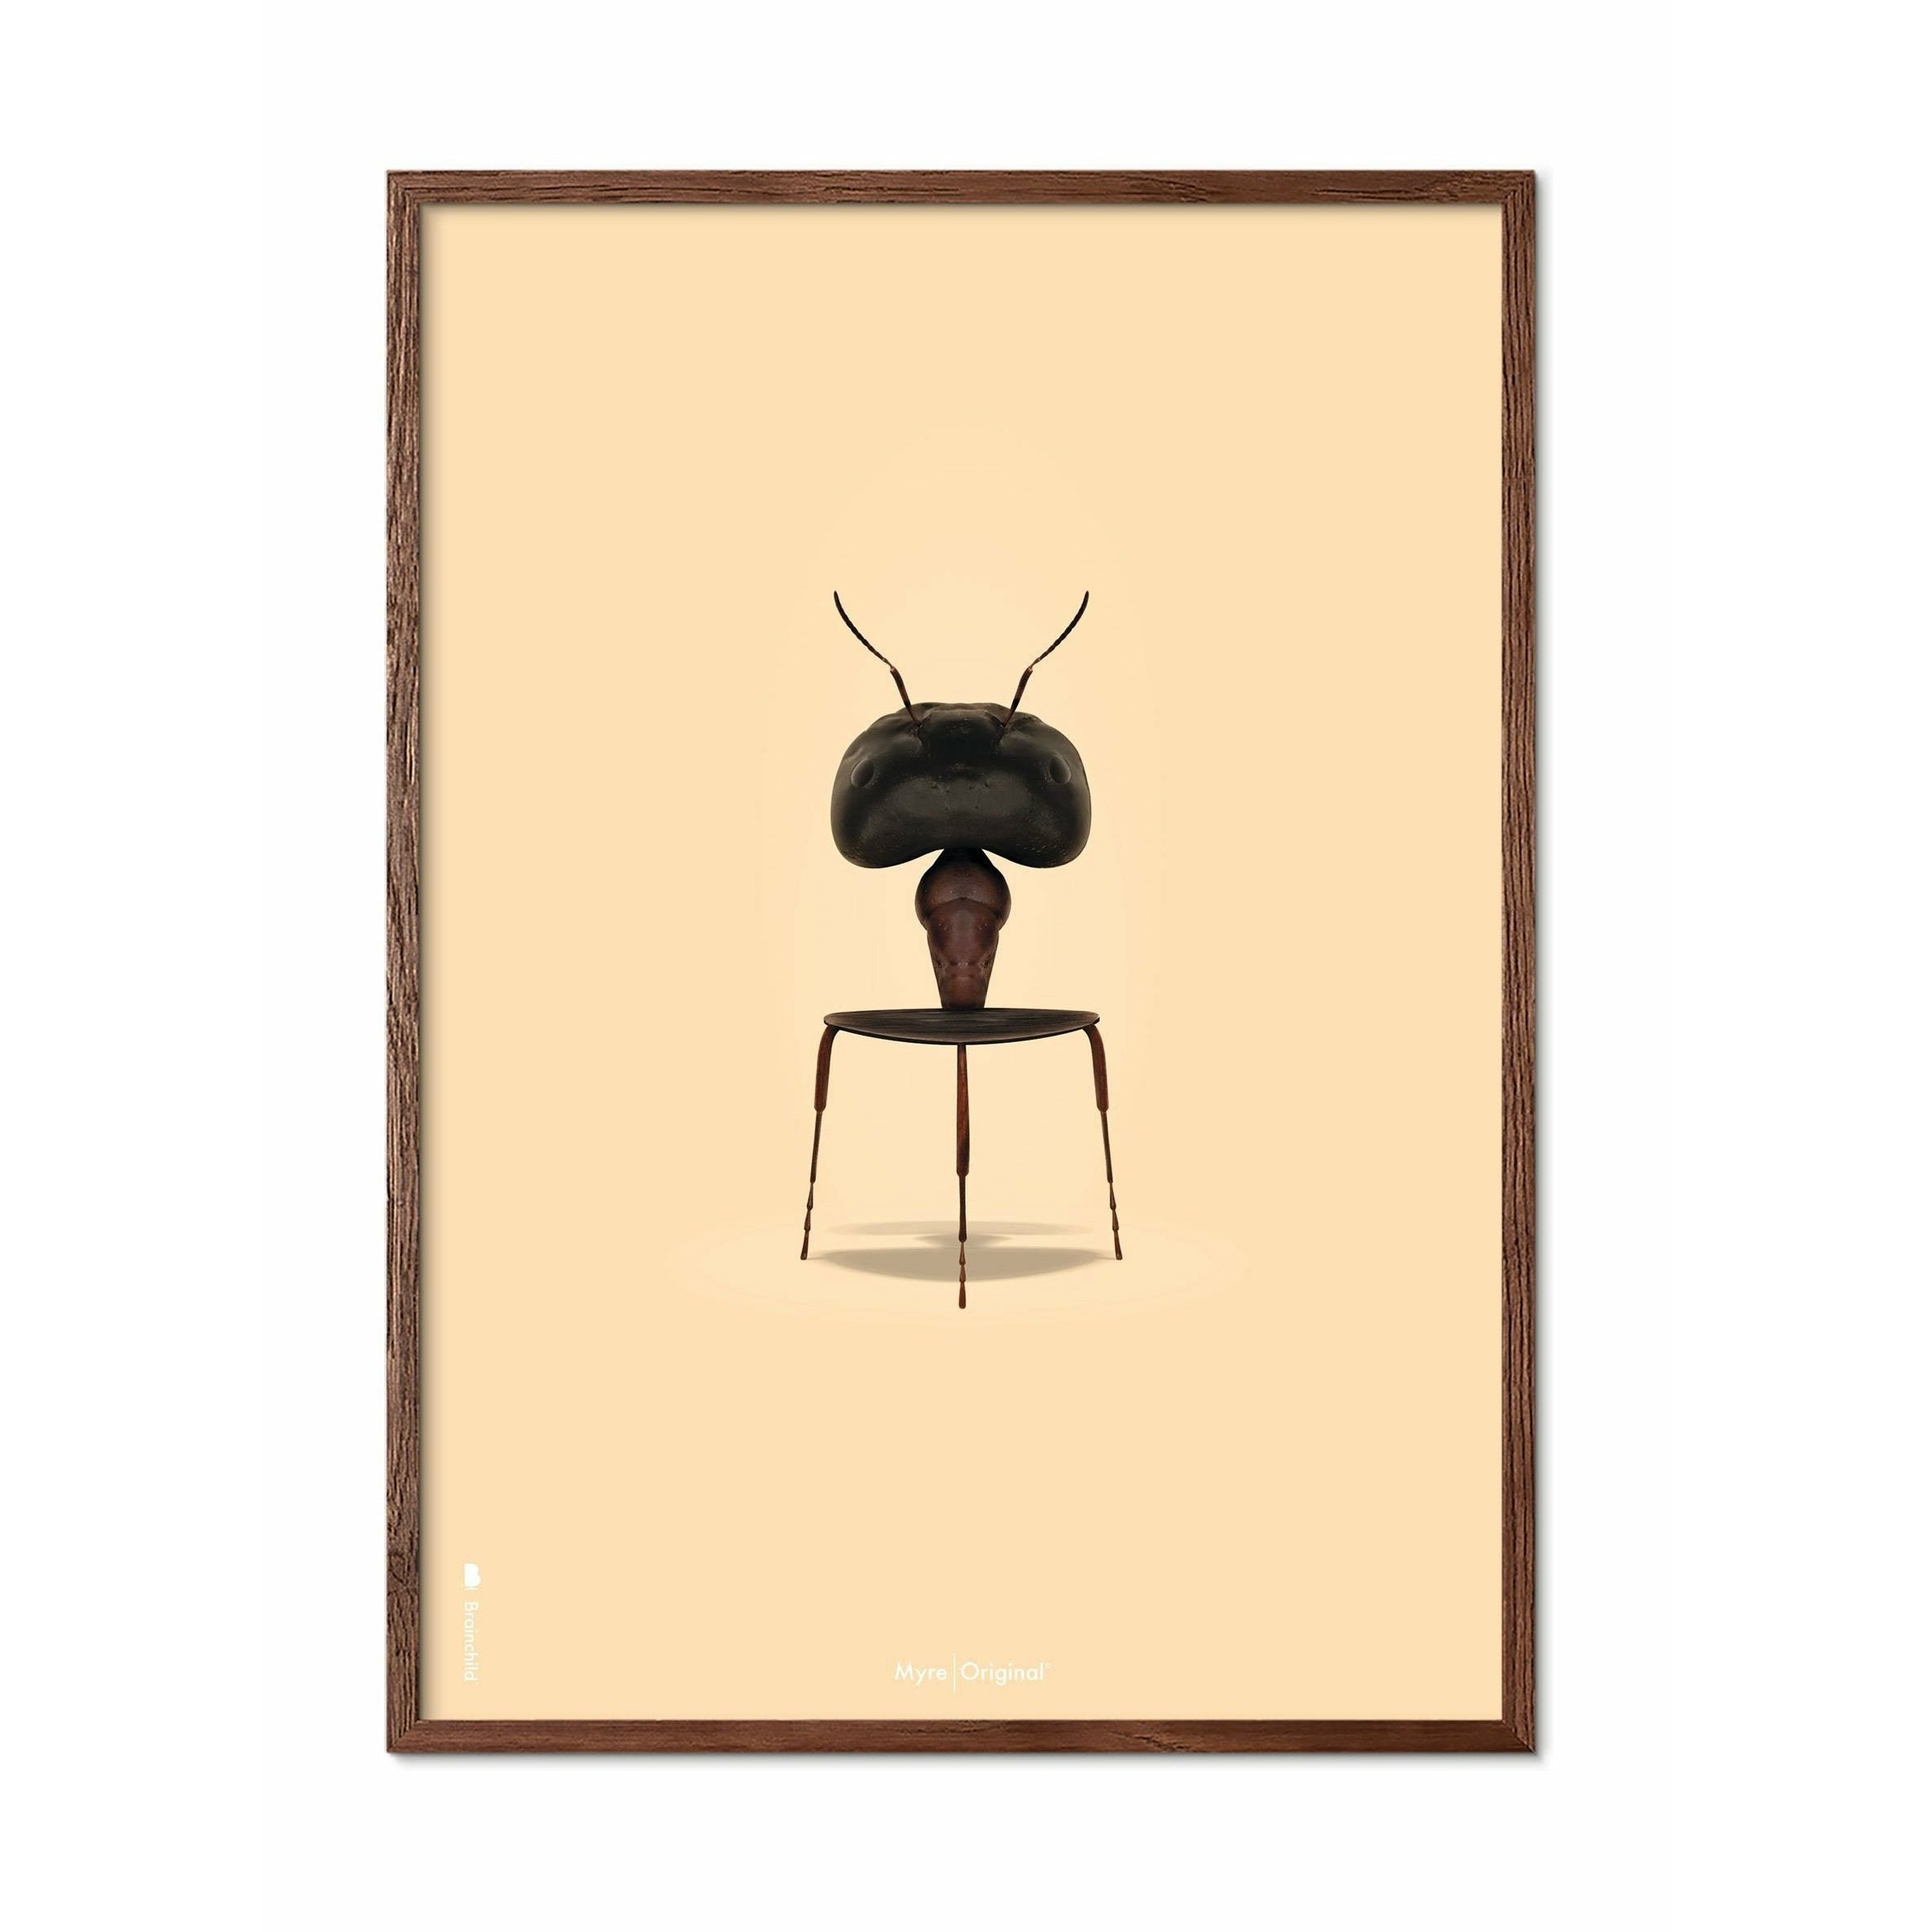 Brainchild Ant Classic Poster, Dark Wood Frame A5, Sand Colored Background